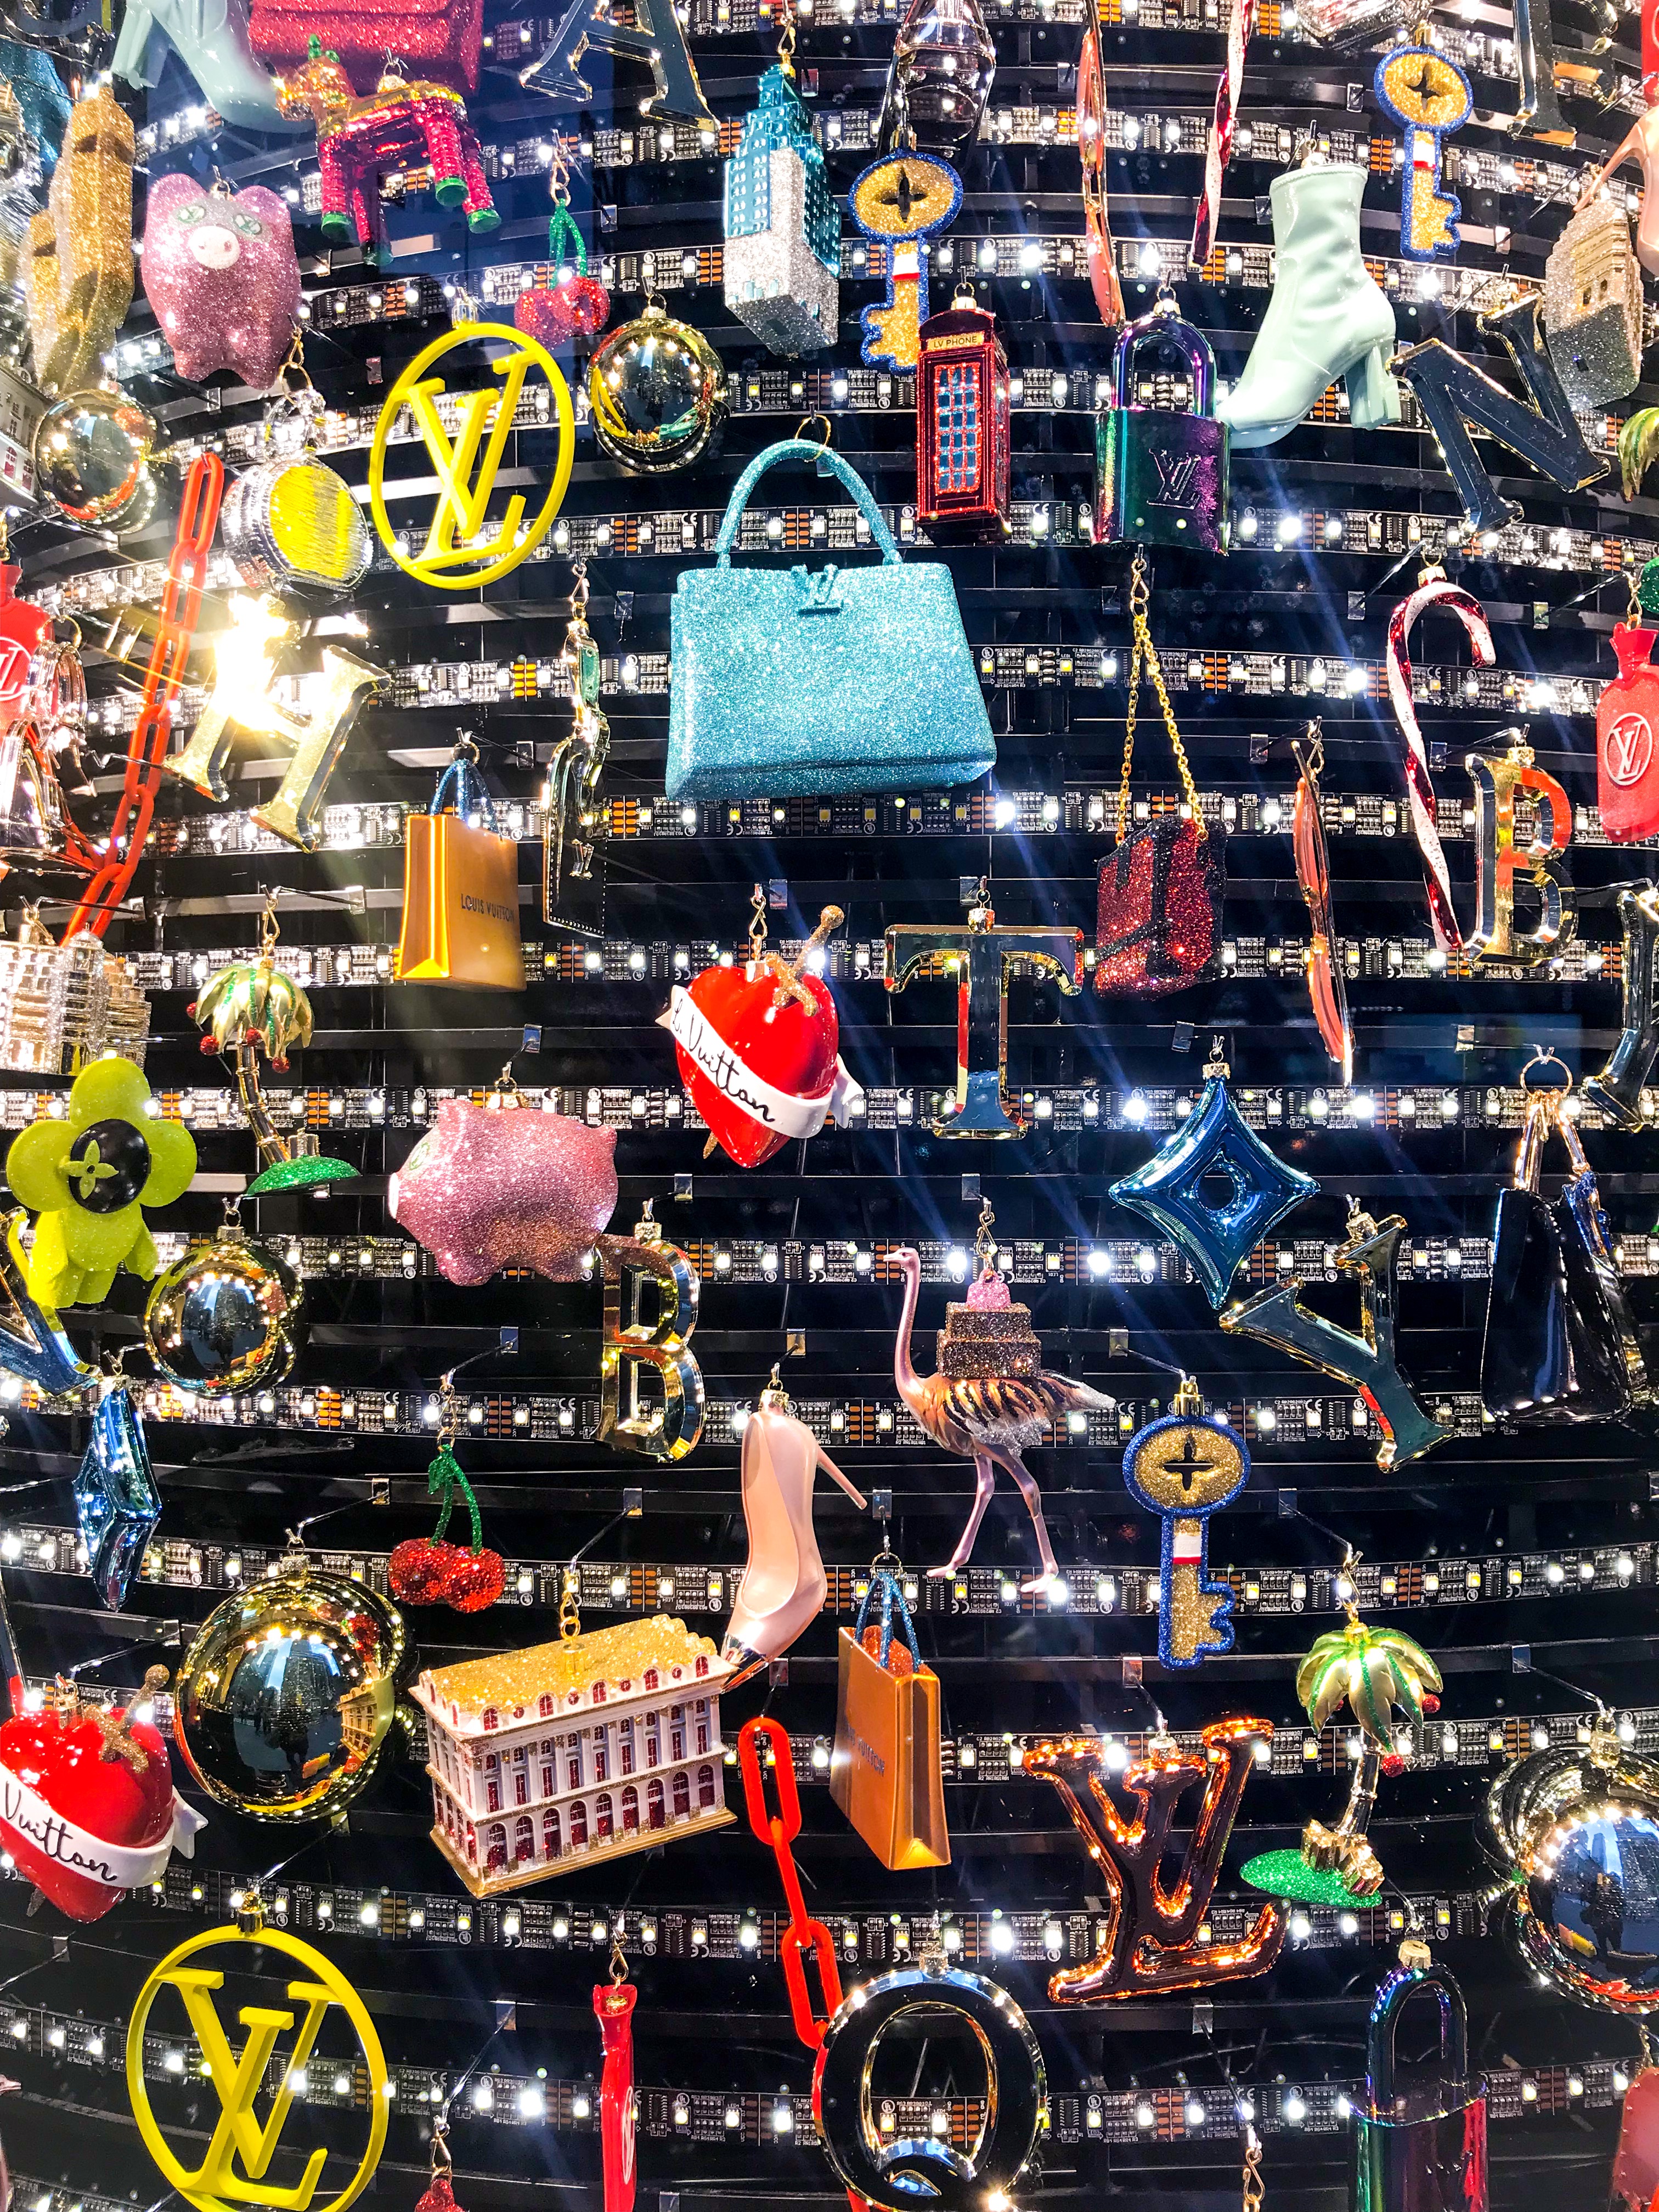 Louis Vuitton ornaments are here to class up your Christmas tree